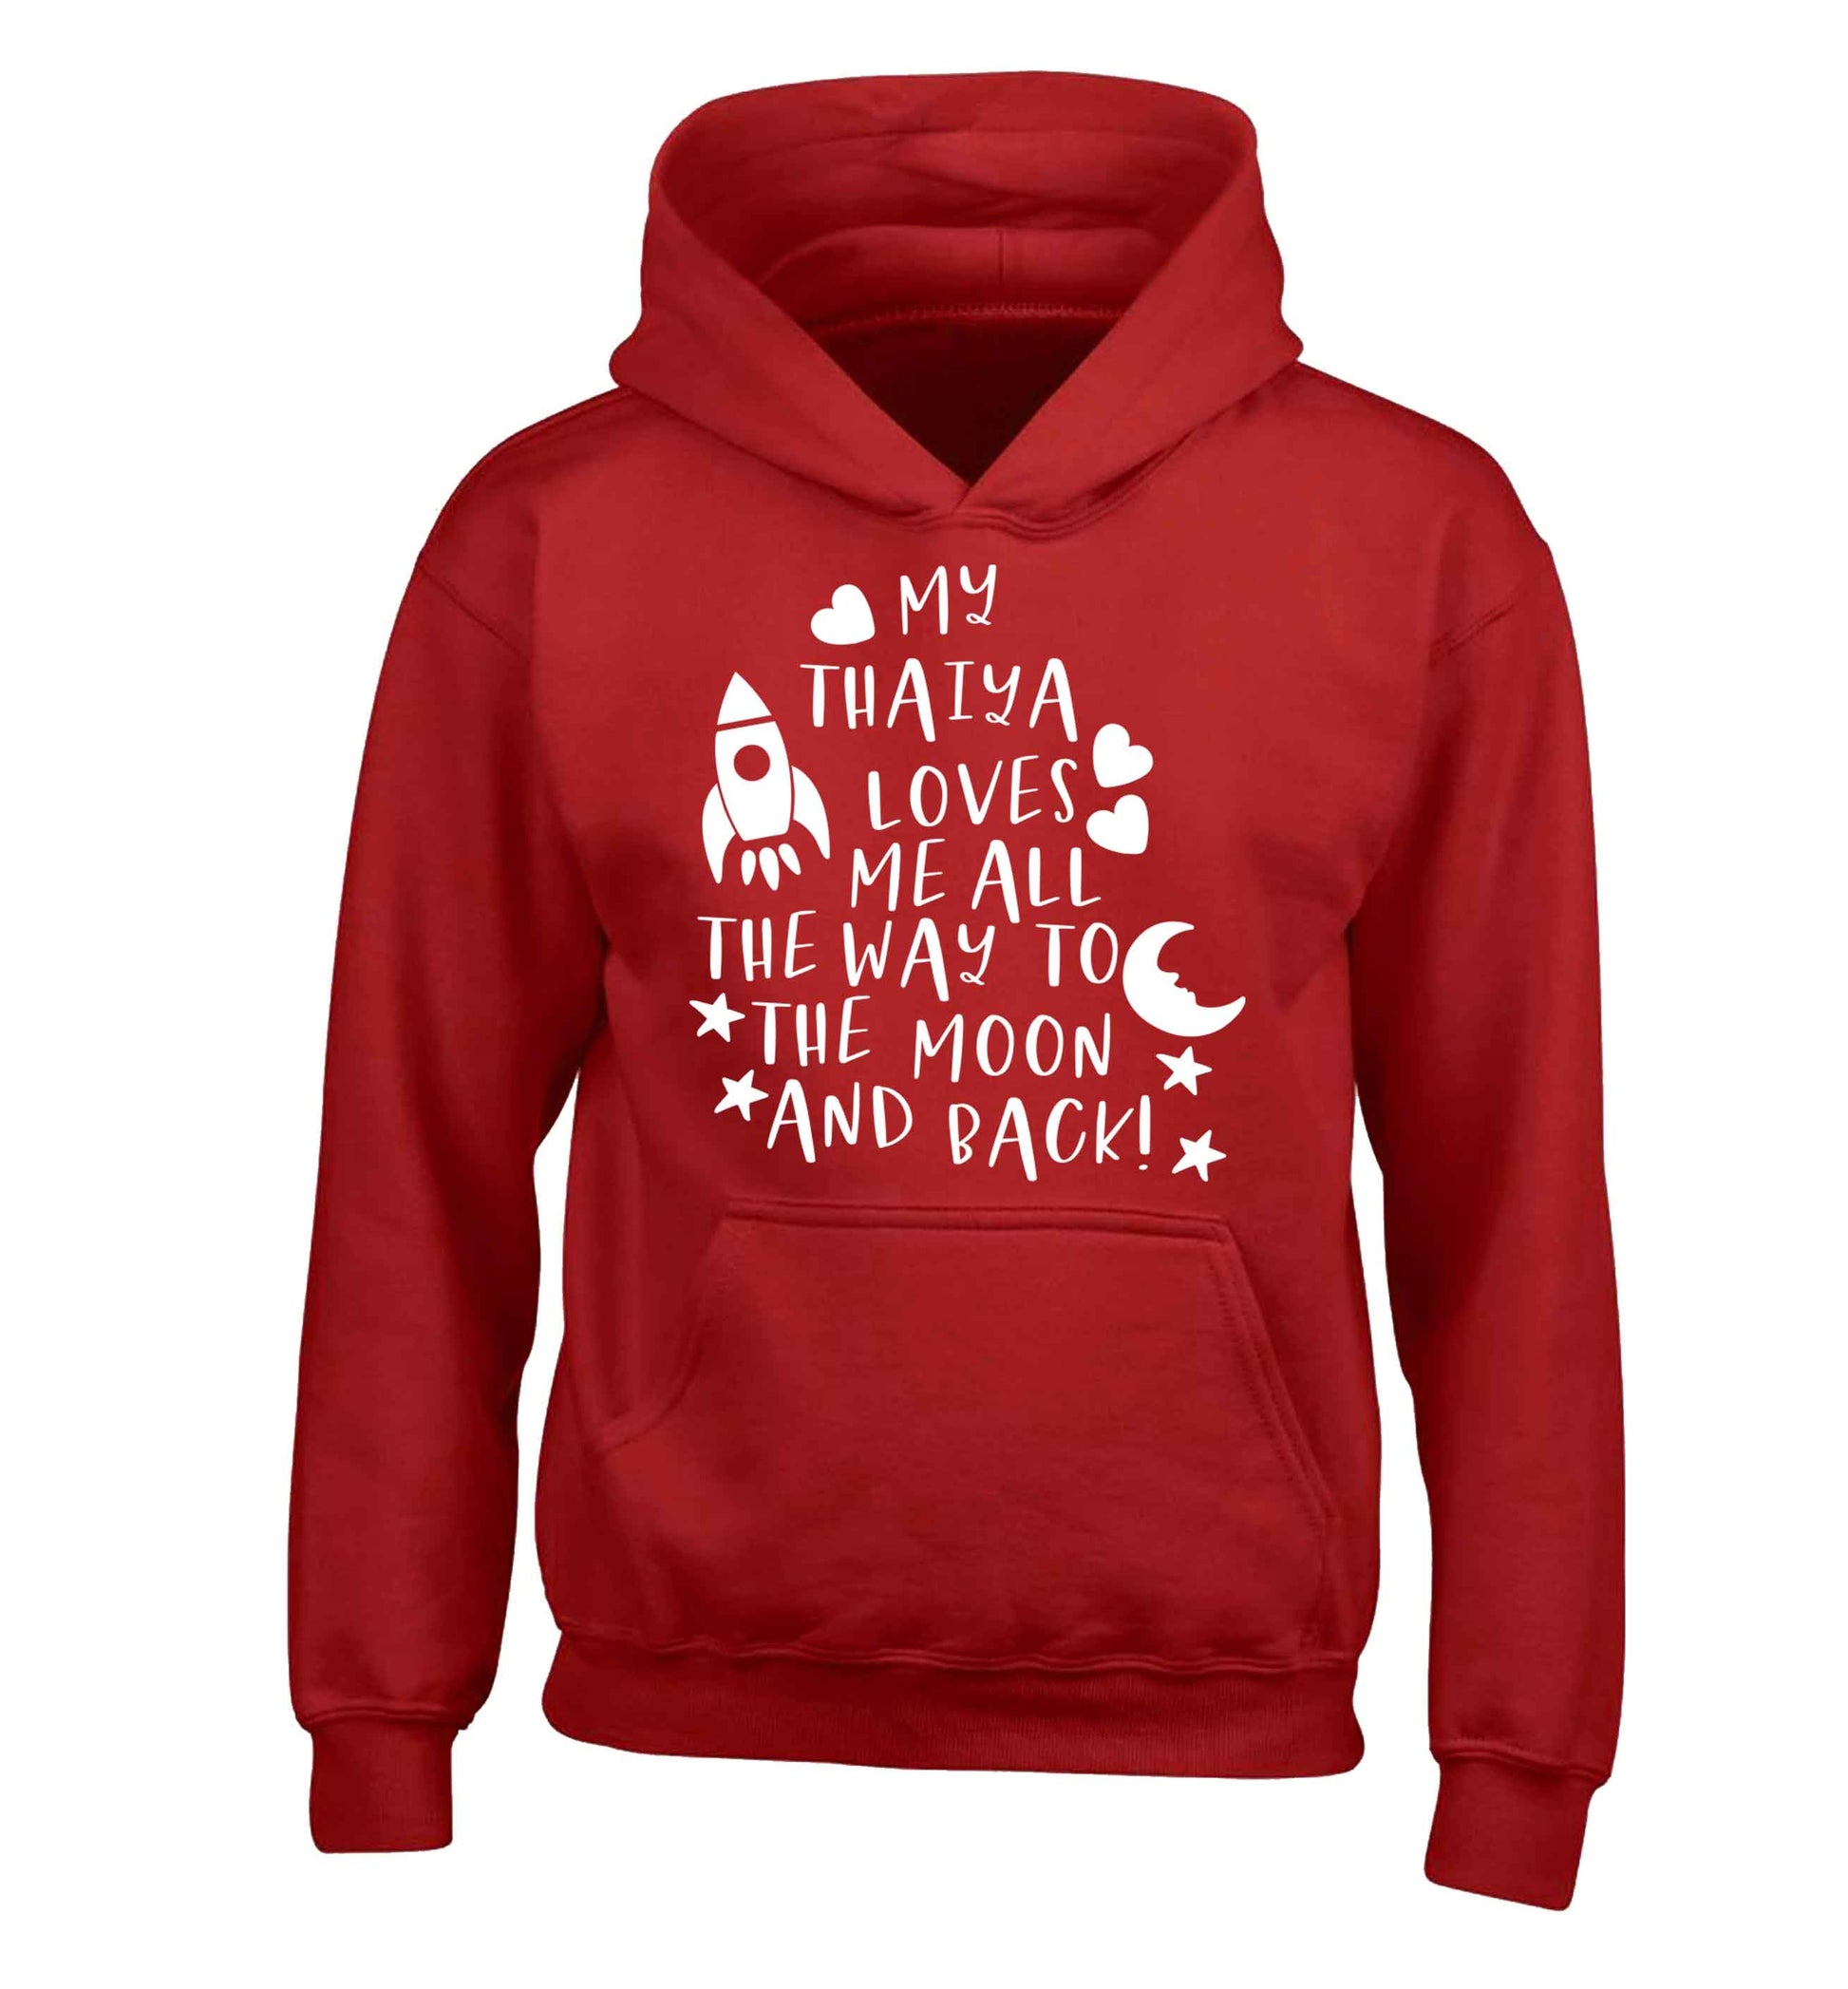 My thaiya loves me all the way to the moon and back children's red hoodie 12-13 Years